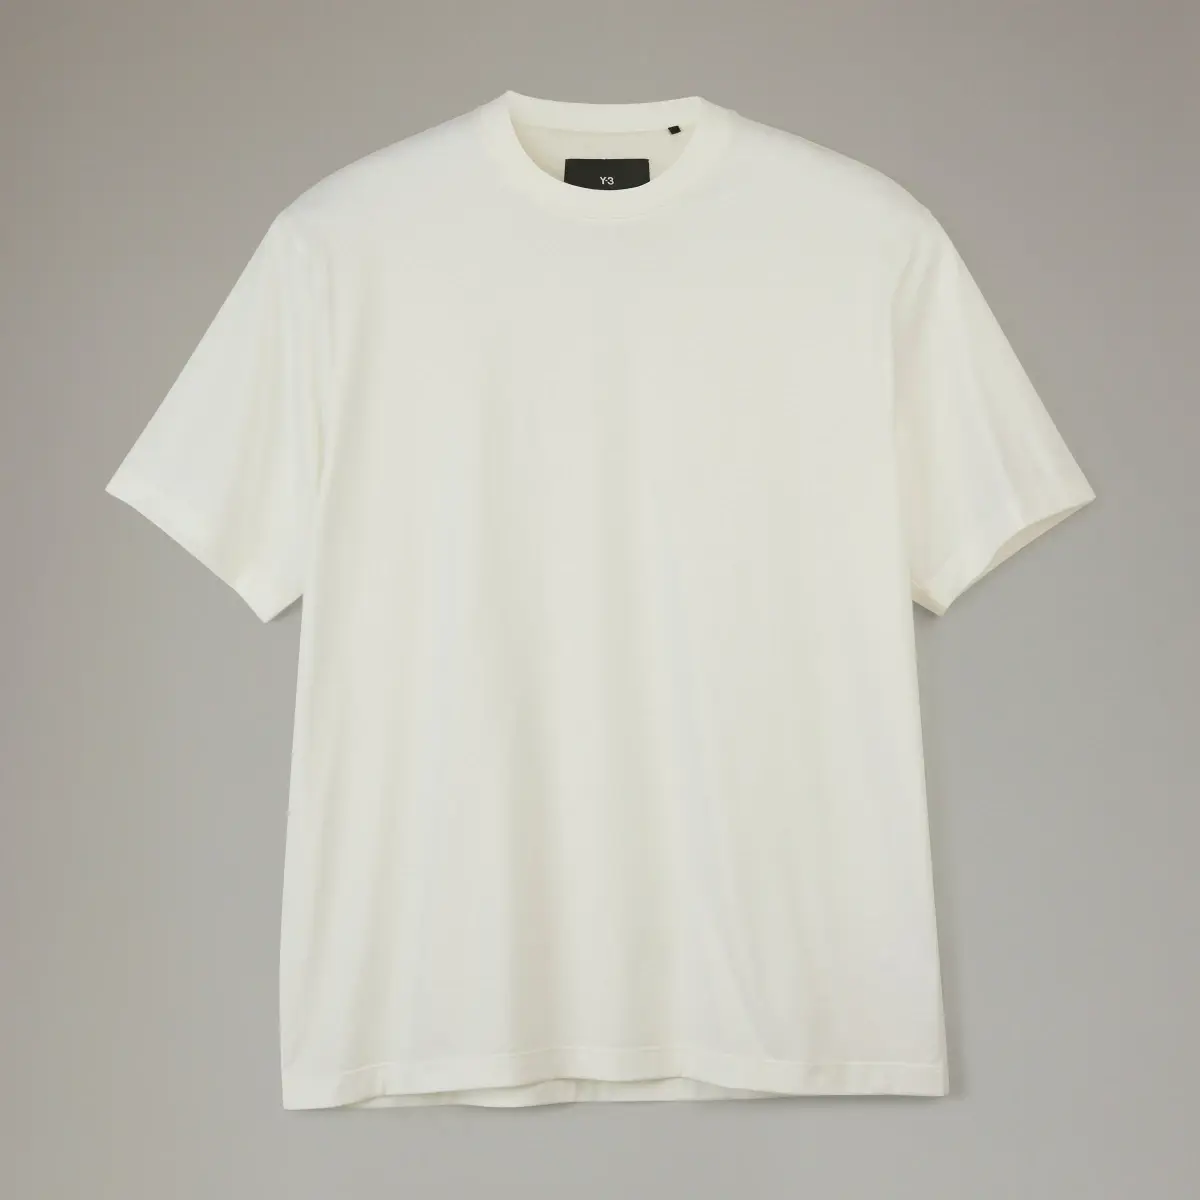 Adidas Y-3 Relaxed Short Sleeve T-Shirt. 3